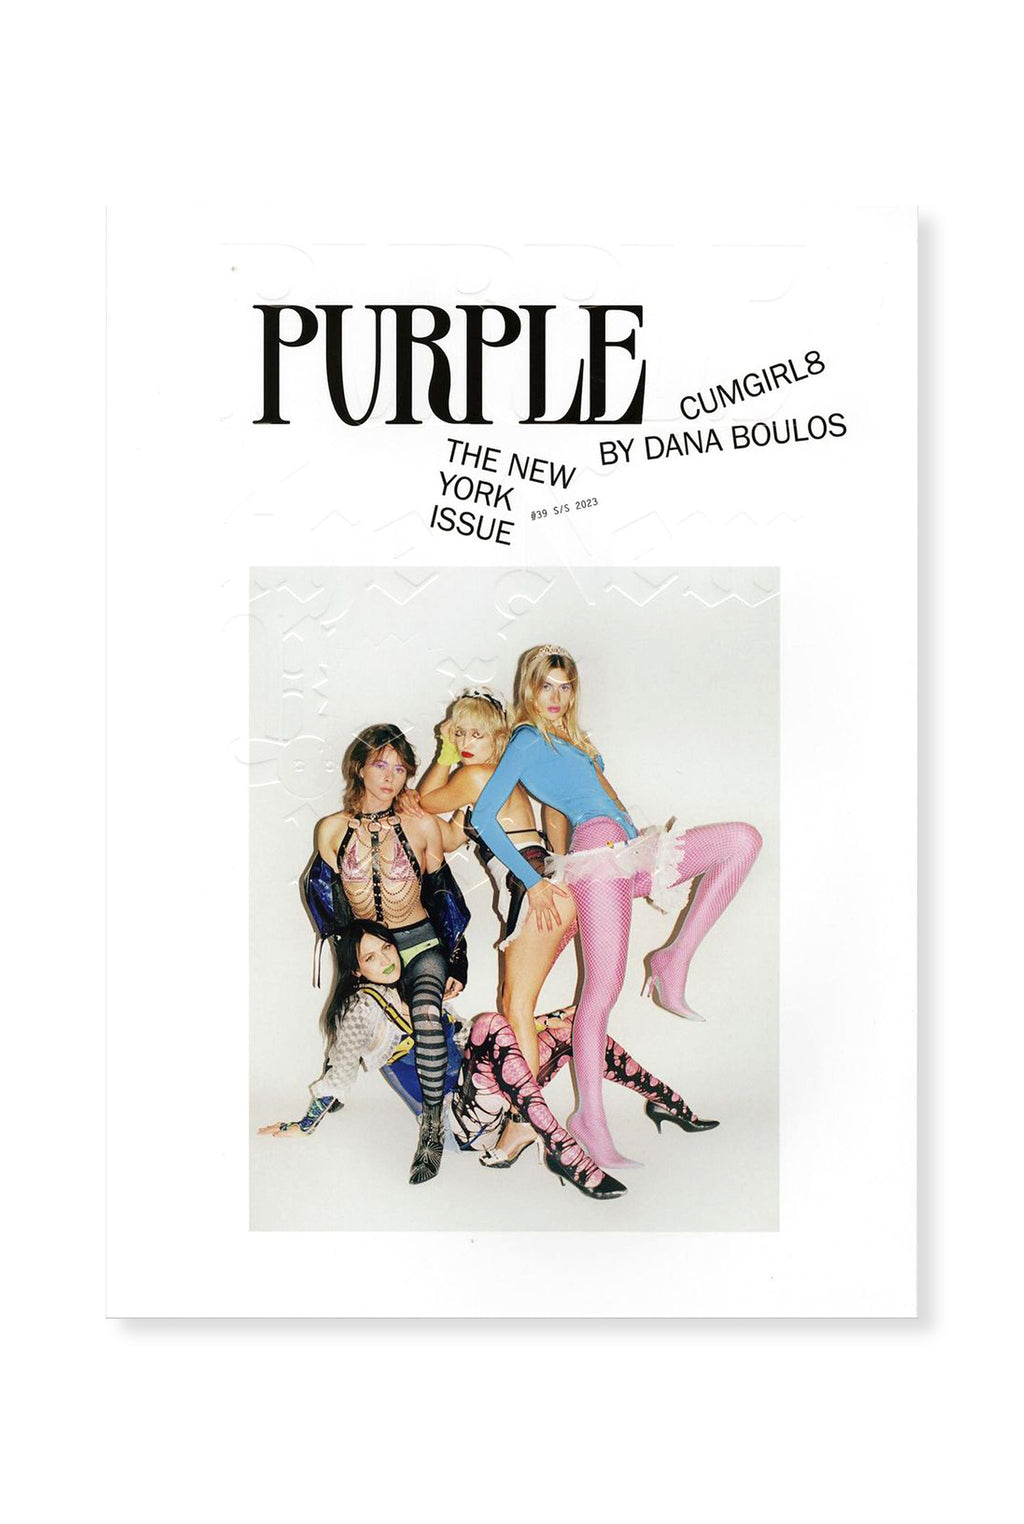 Purple, Issue 39 - The New York Issue - BACK IN STOCK!